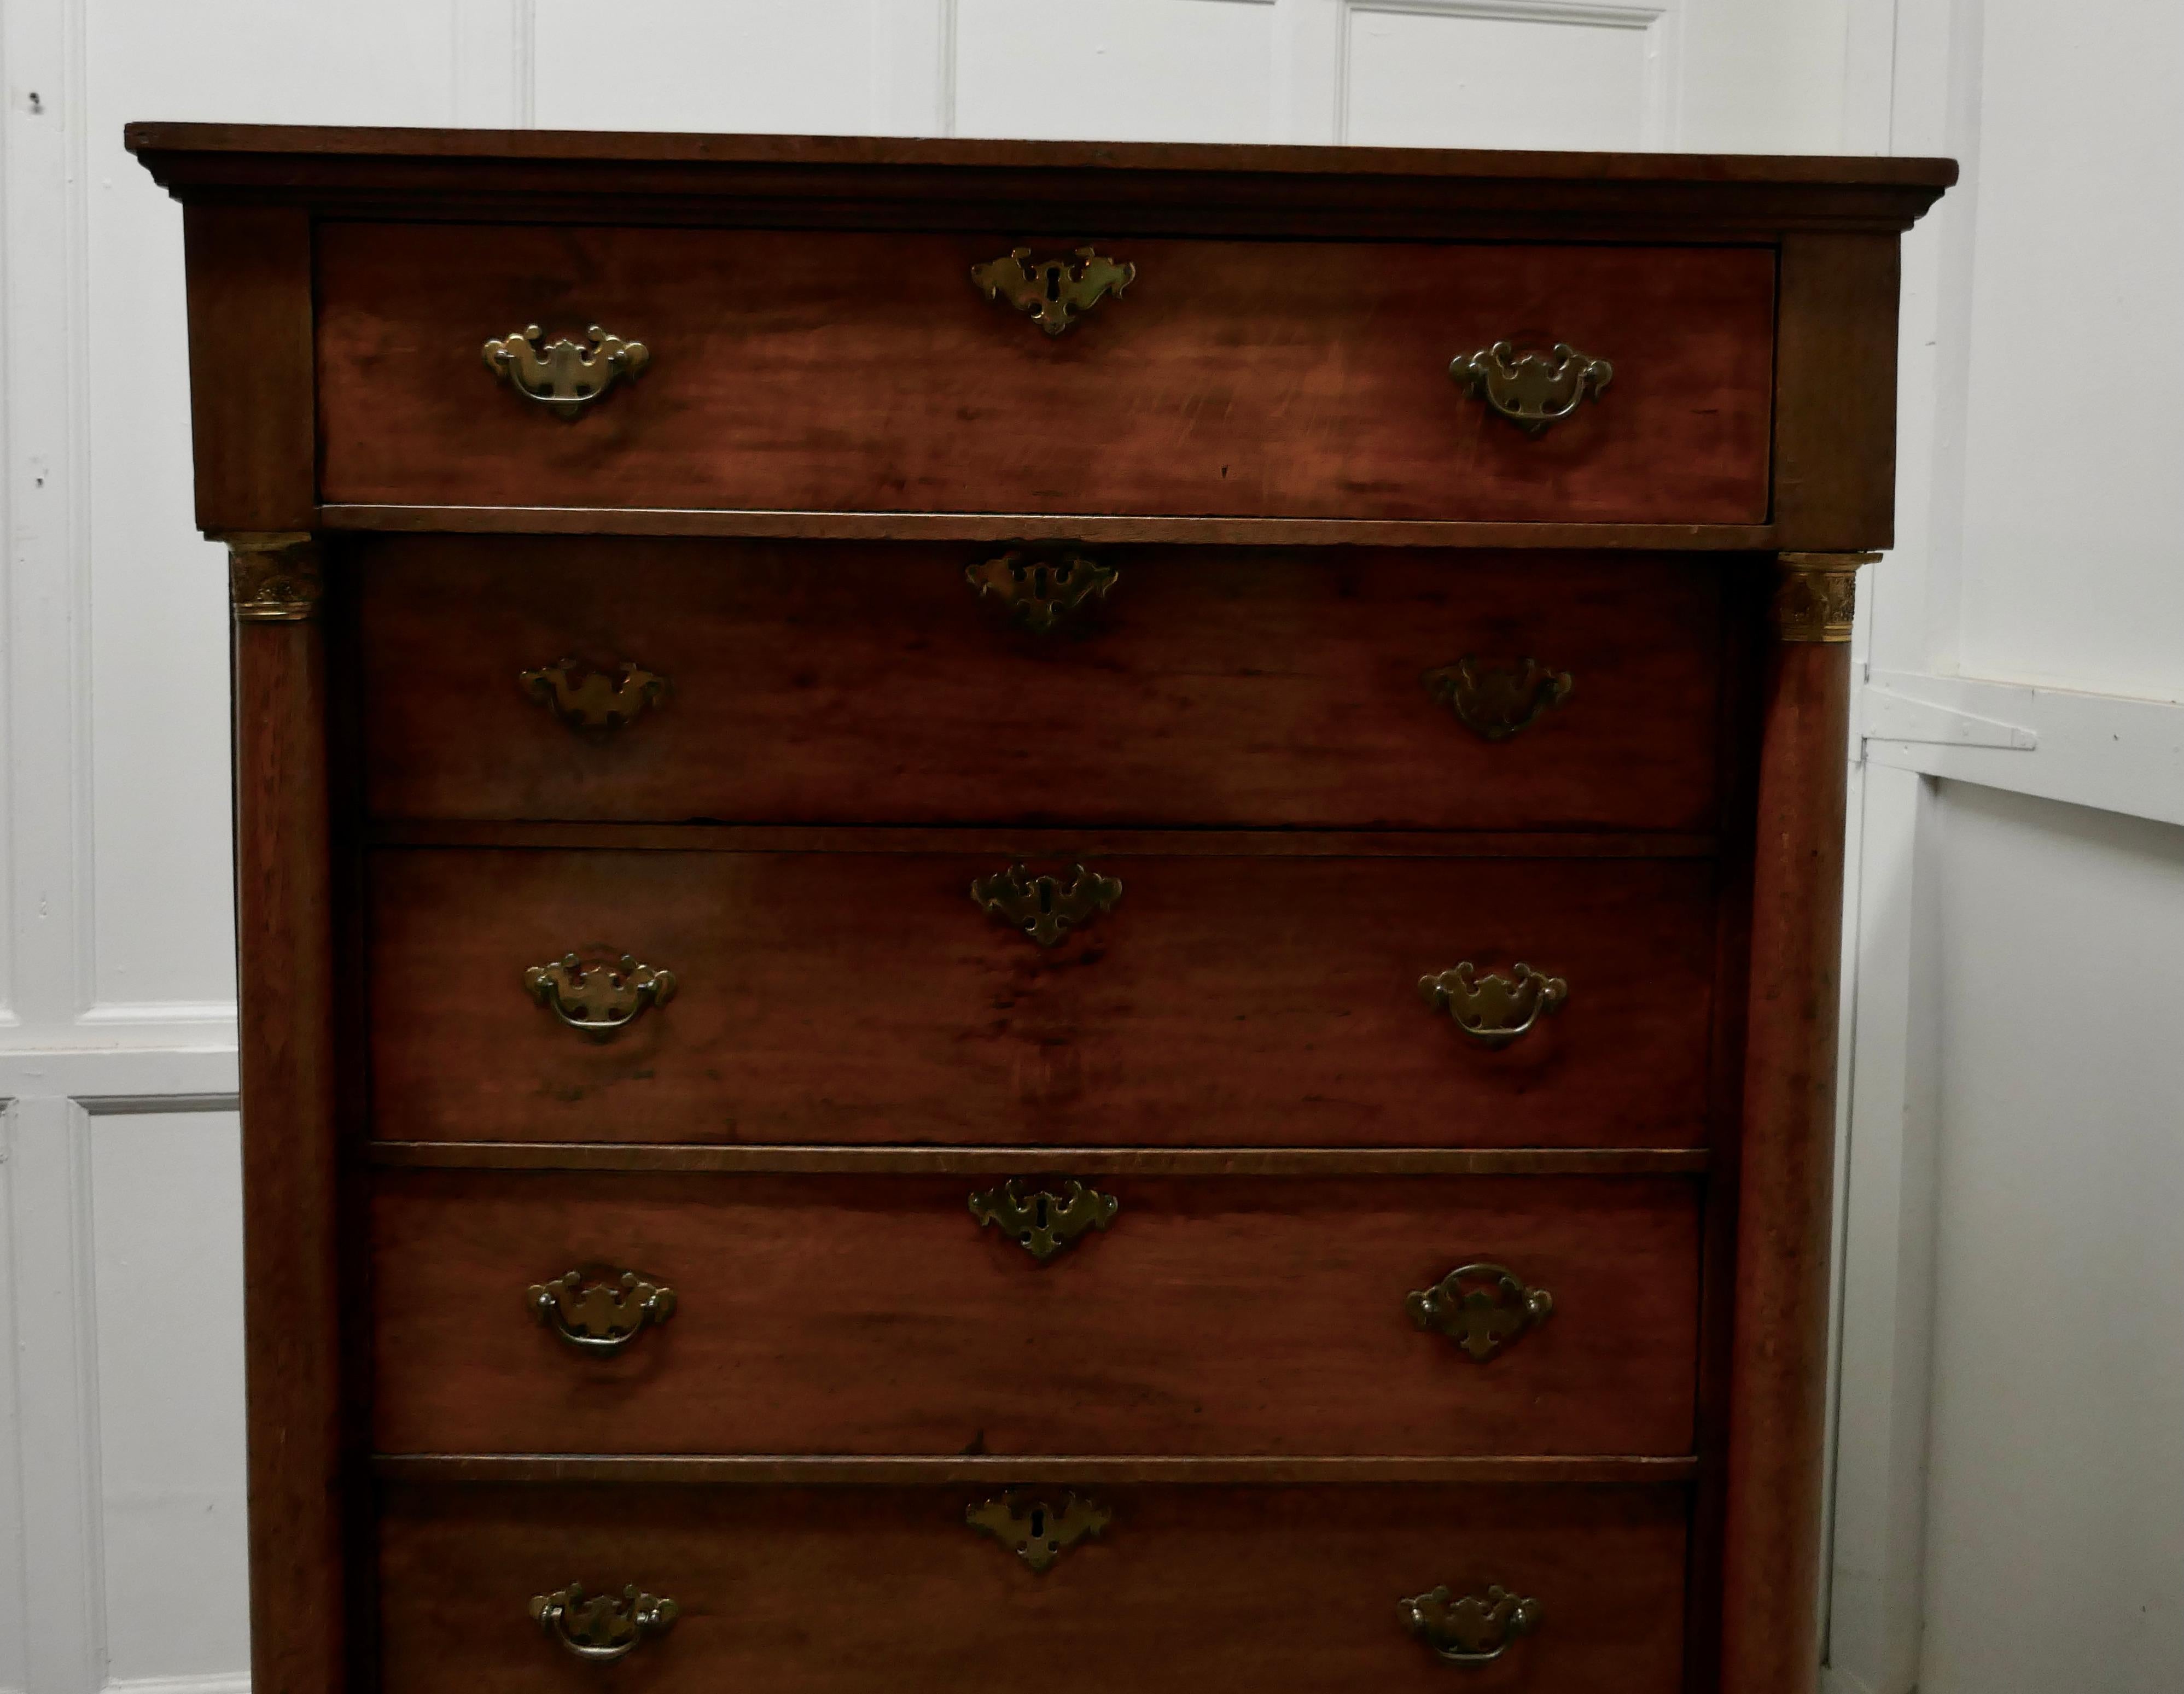 19th century tall 6 drawer oak chest of drawers 

This is a superb oak chest of drawers it is unusual and very desirable style of 6 full width drawers
The chest has slender columns on each side set with ormolu mounts 
The drawers have brass swan